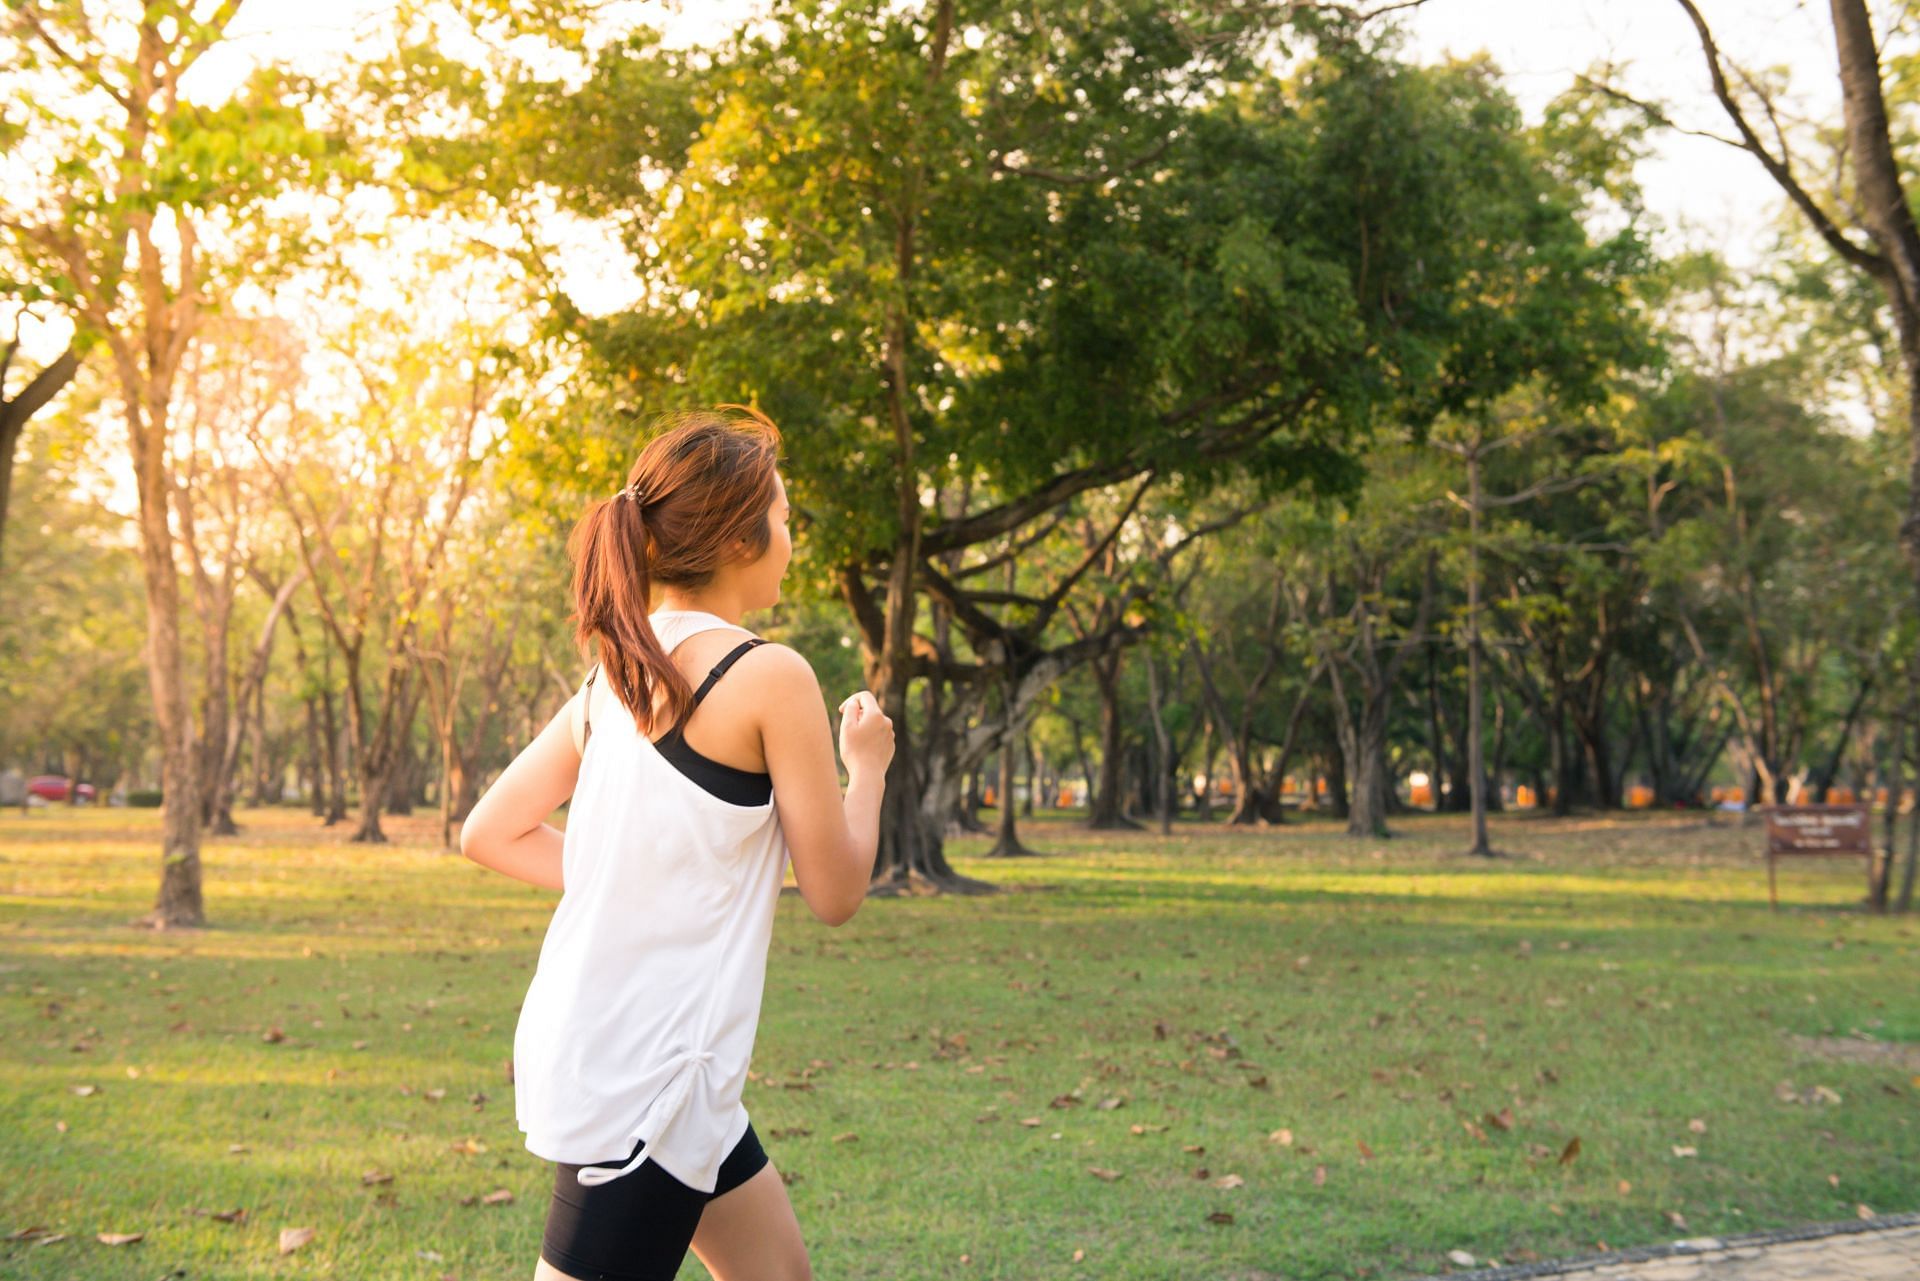 Even a modest bit of exercise can have a significant impact on your physical and mental health (Image via Pexels/Tirachard Kumtanom)